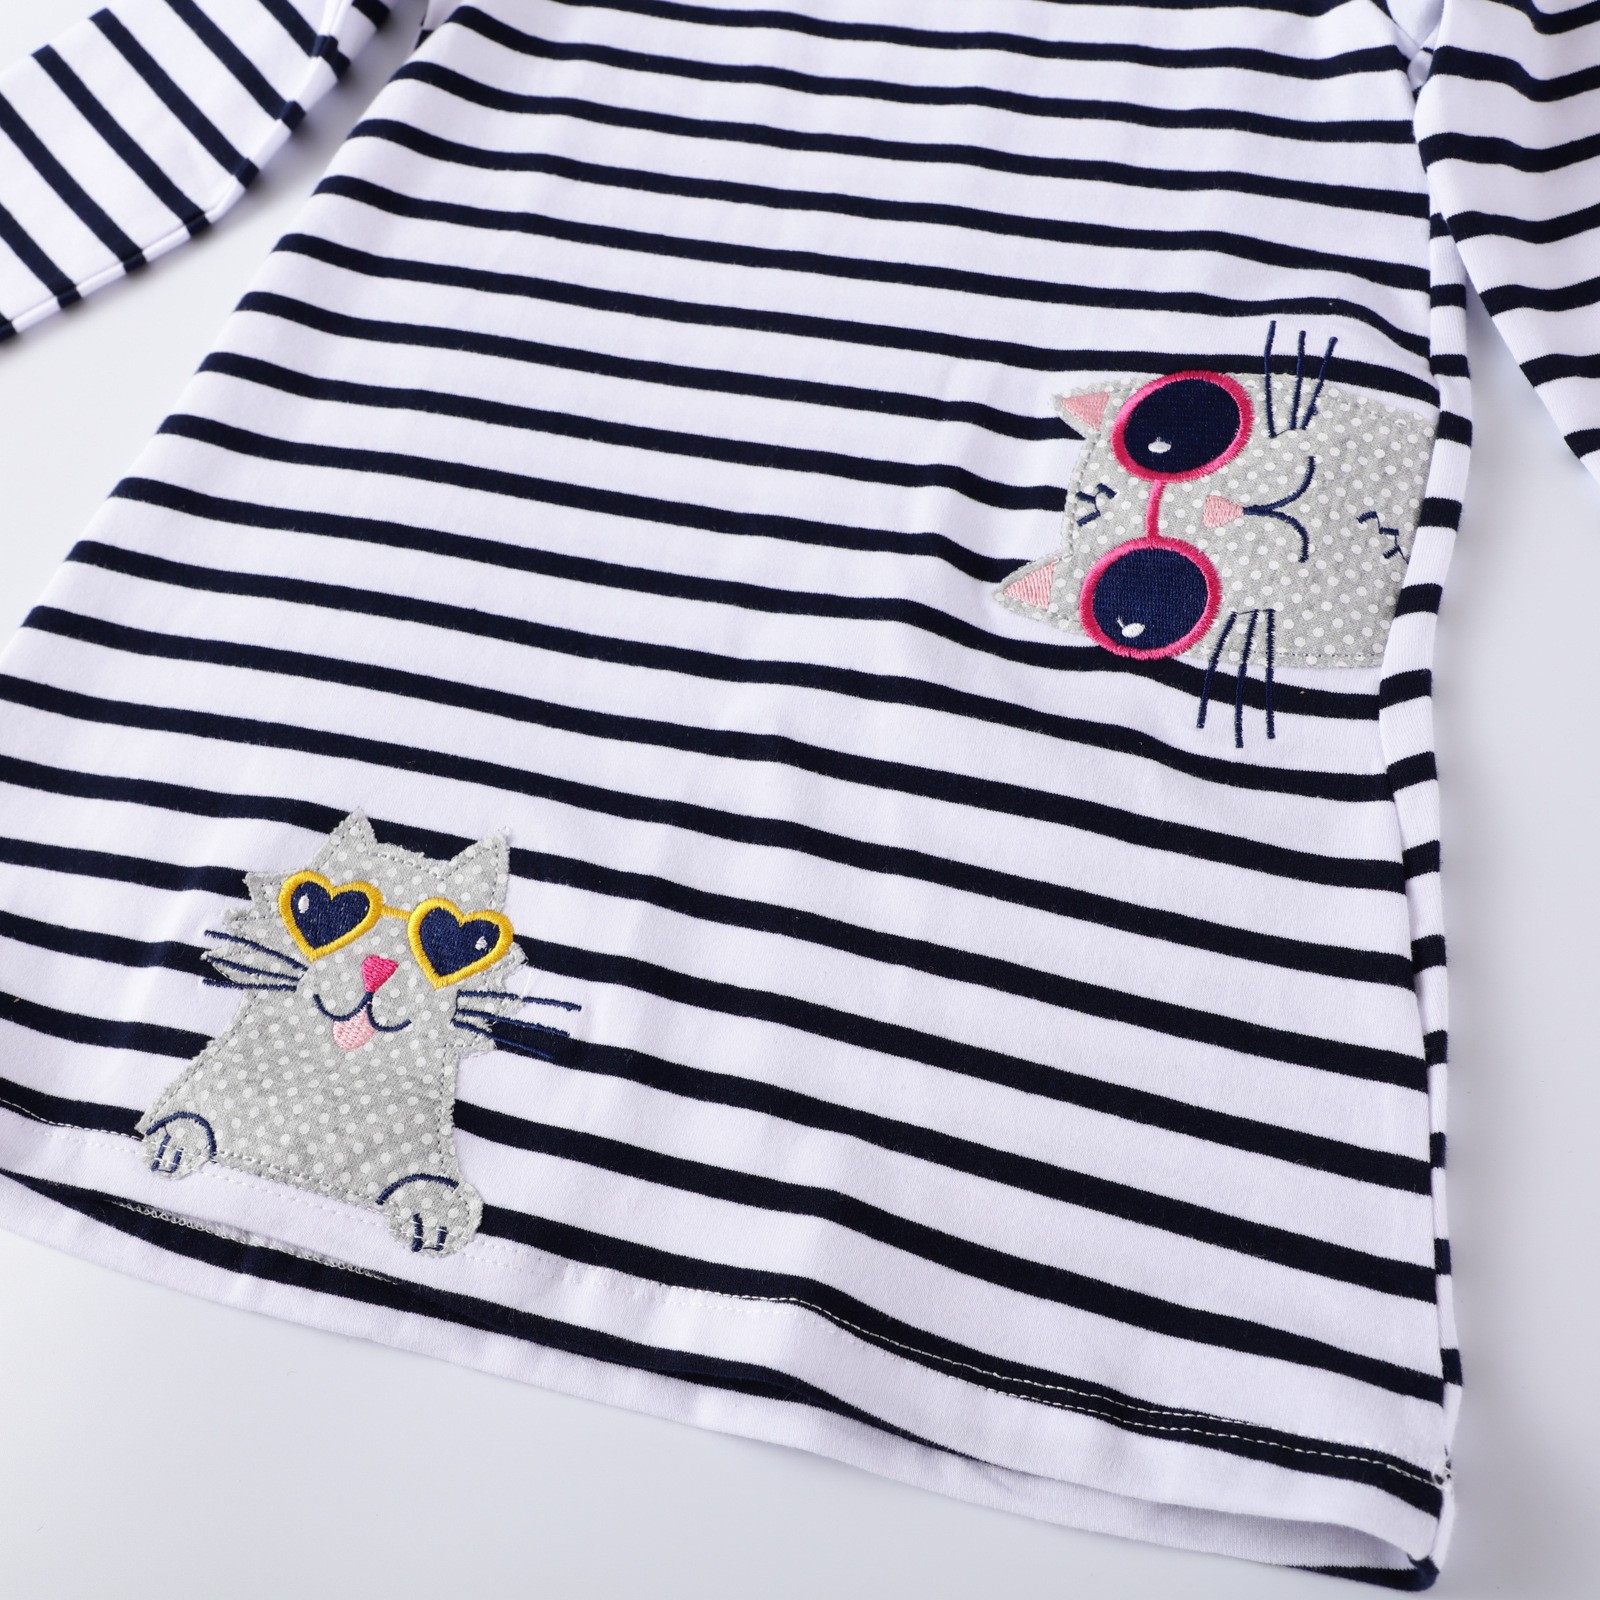 Little maven baby girls long sleeve shirt lovely cat lined cotton children's soft and comfortable casual clothes for kids 2-7 years